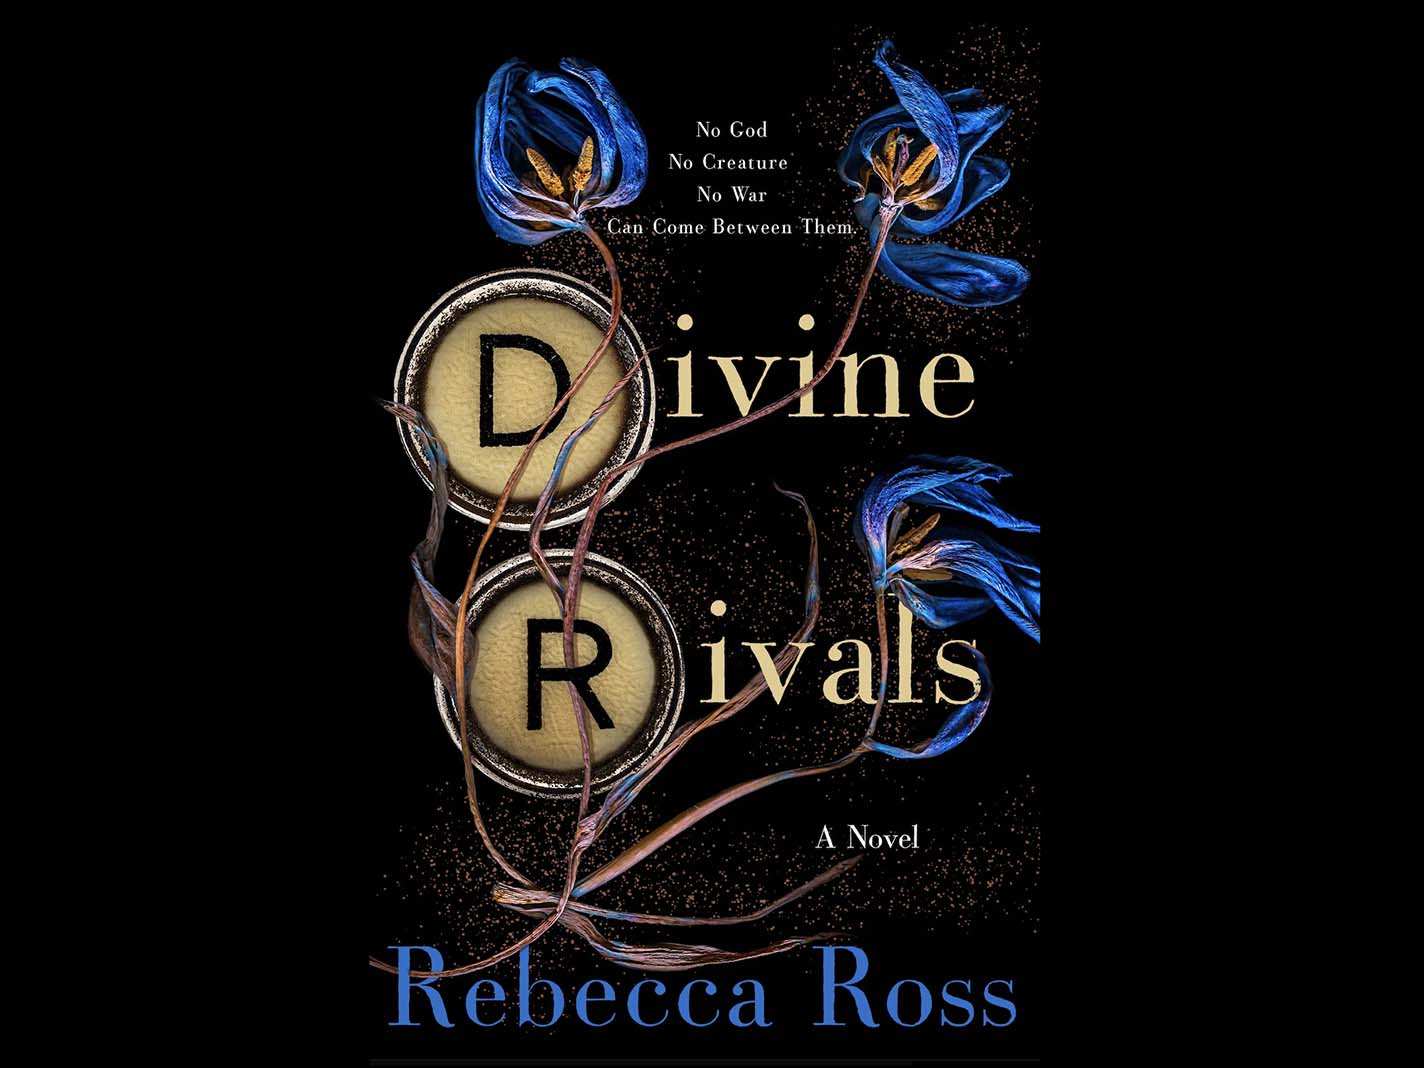 Divine Rivals by Rebecca Ross book cover featuring magical typewriter keys.